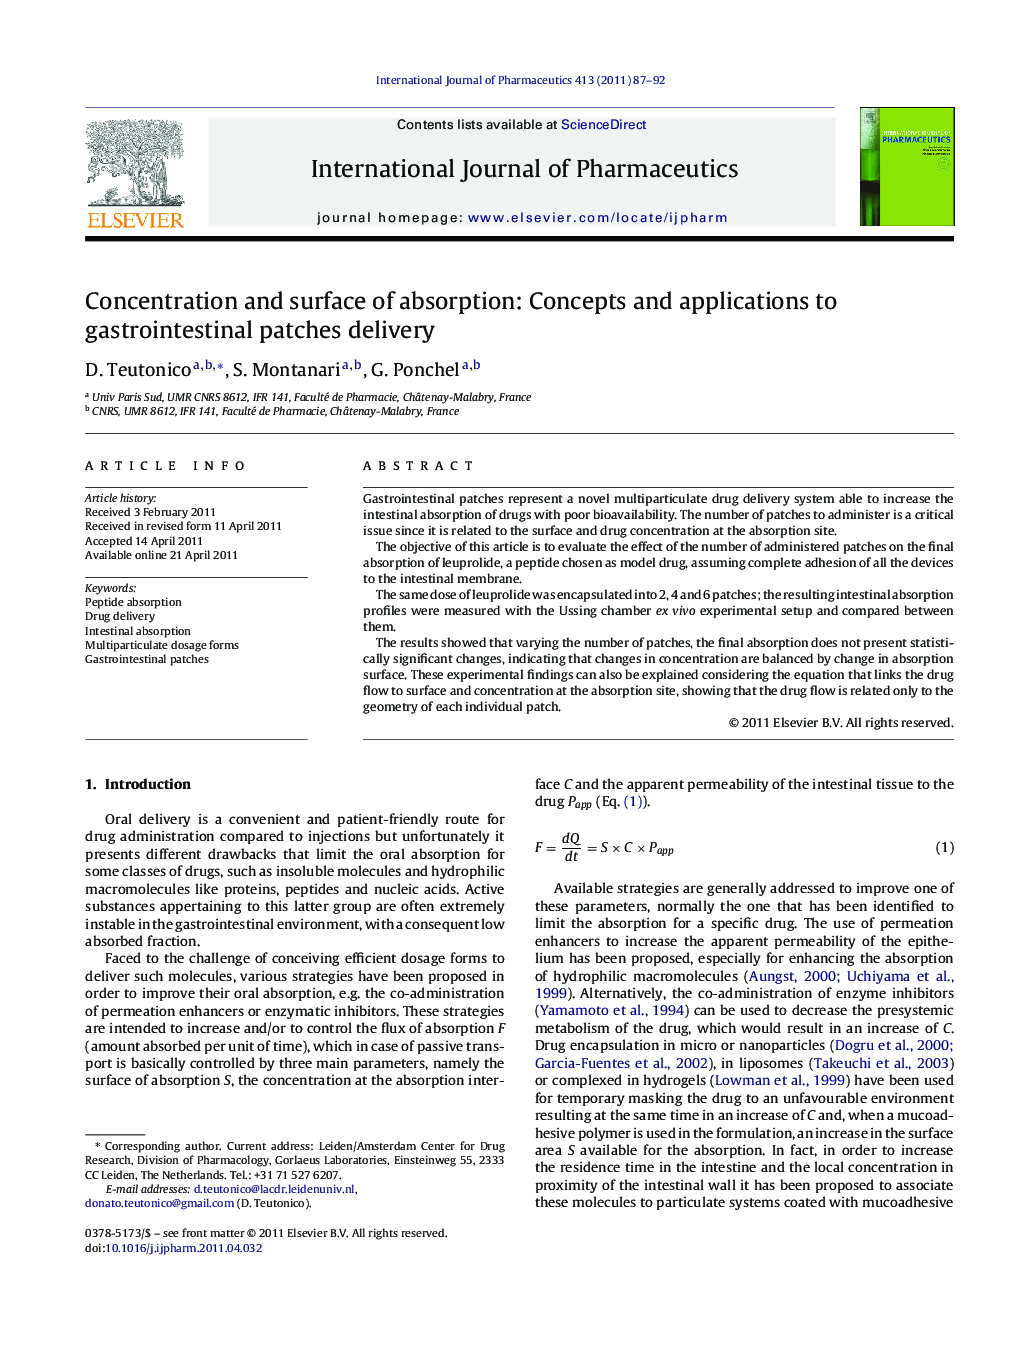 Concentration and surface of absorption: Concepts and applications to gastrointestinal patches delivery